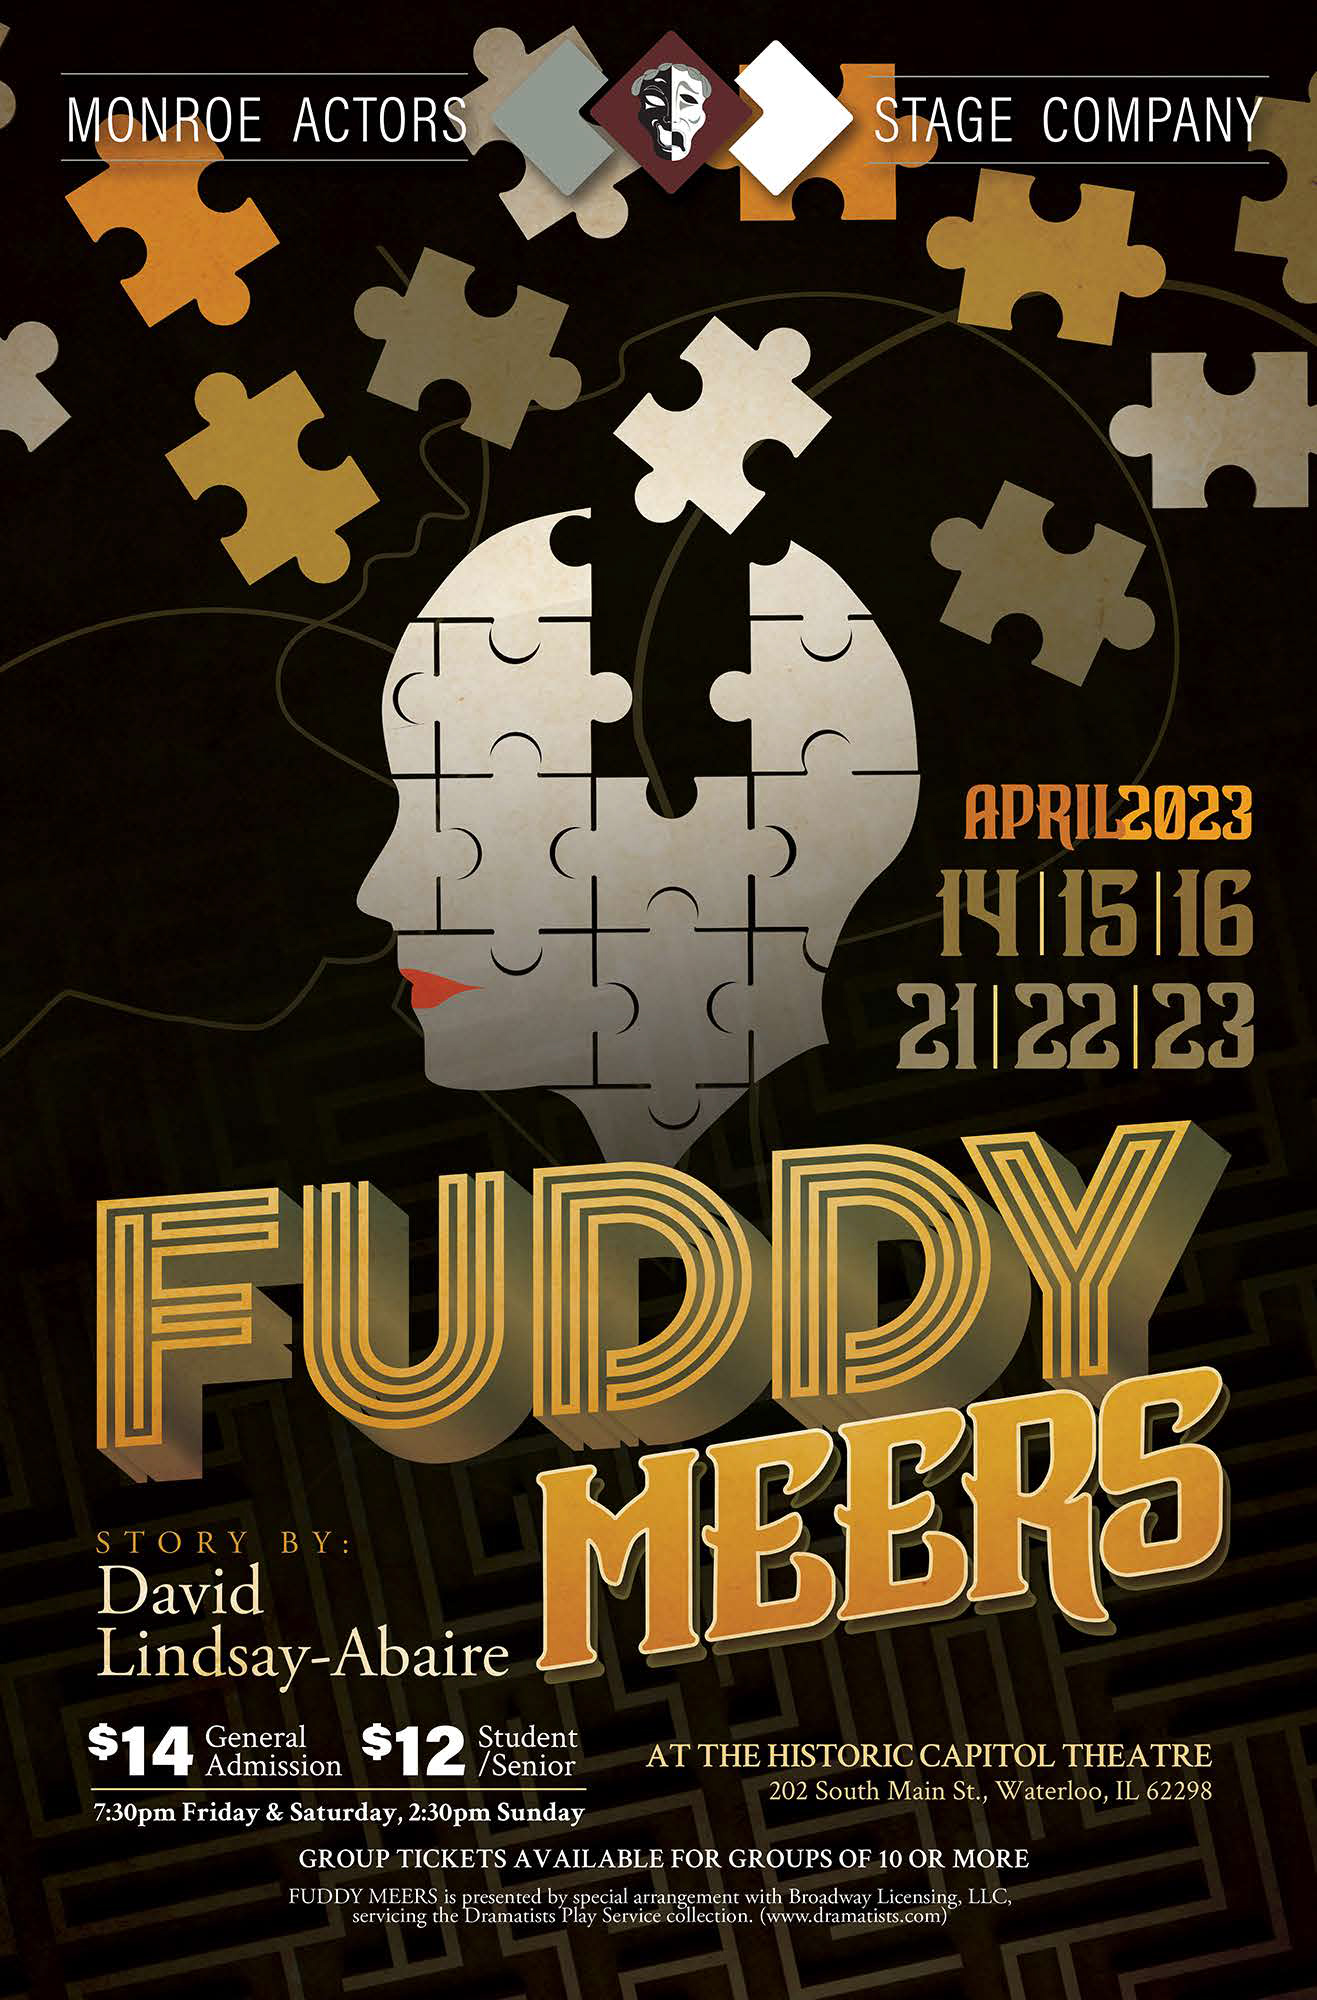 MASC's Production of Fuddy Meers - April 2023